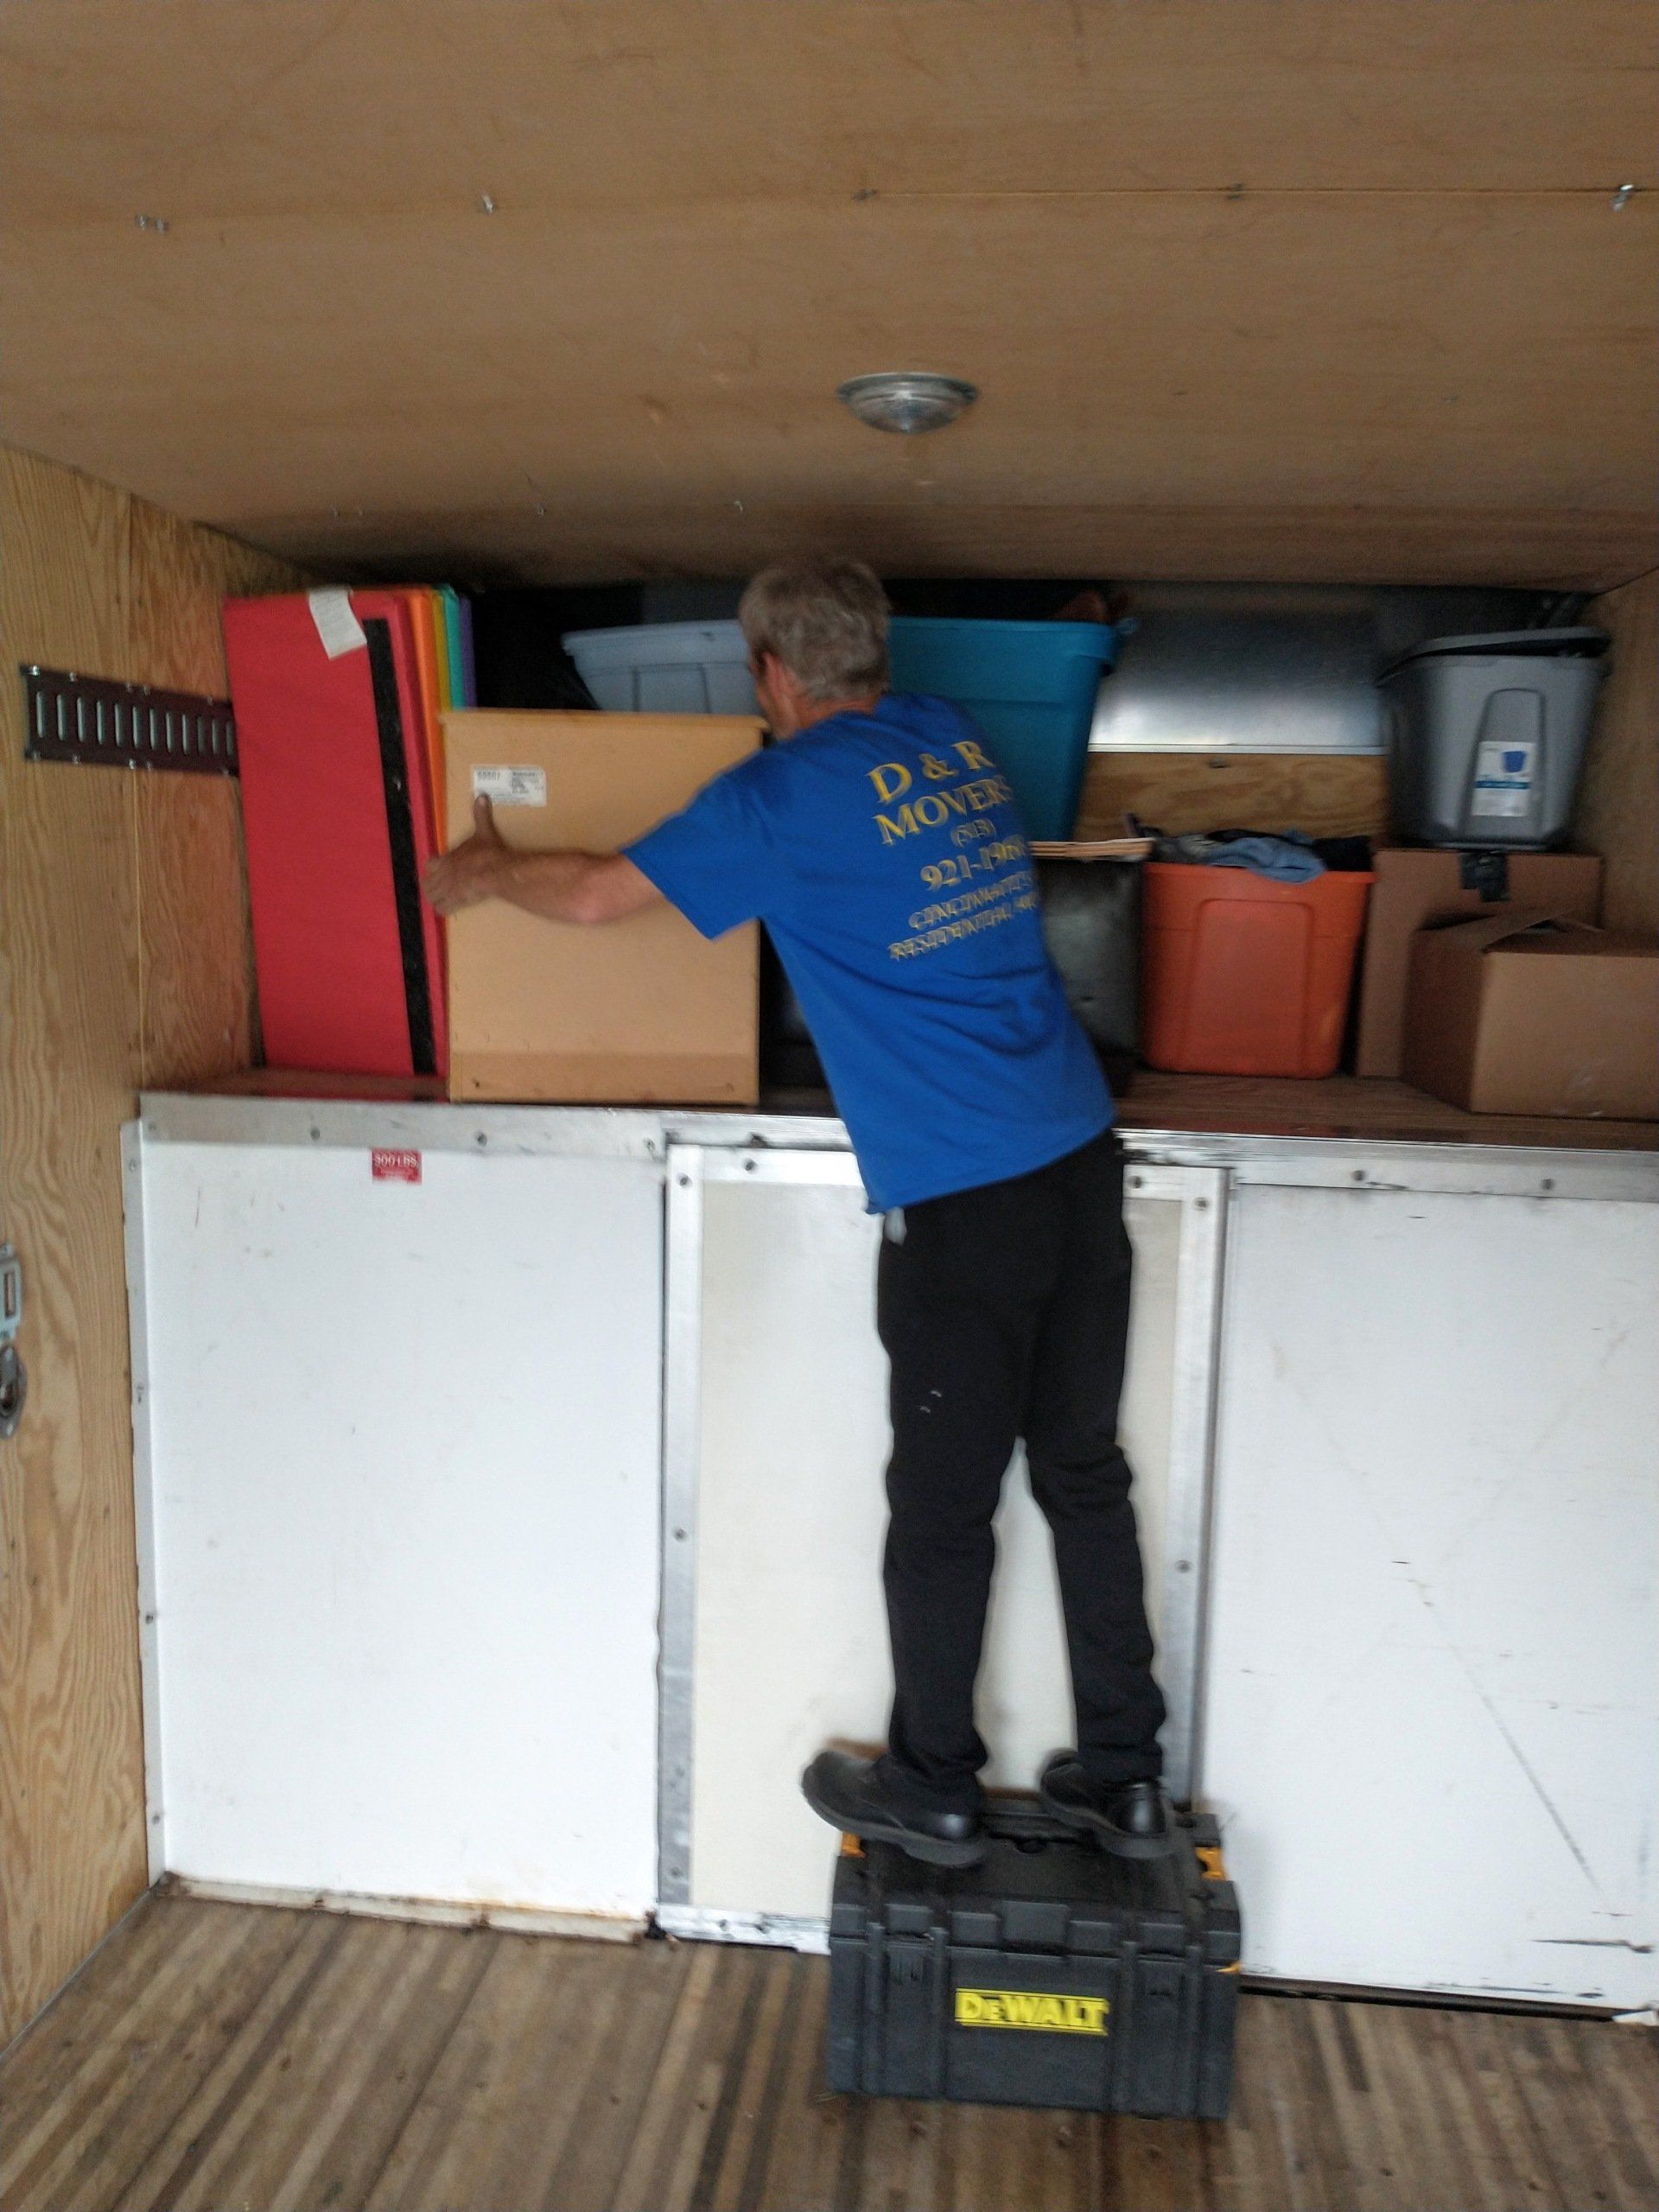 Optimize Your Time By Hiring Movers When Moving For Your Employer